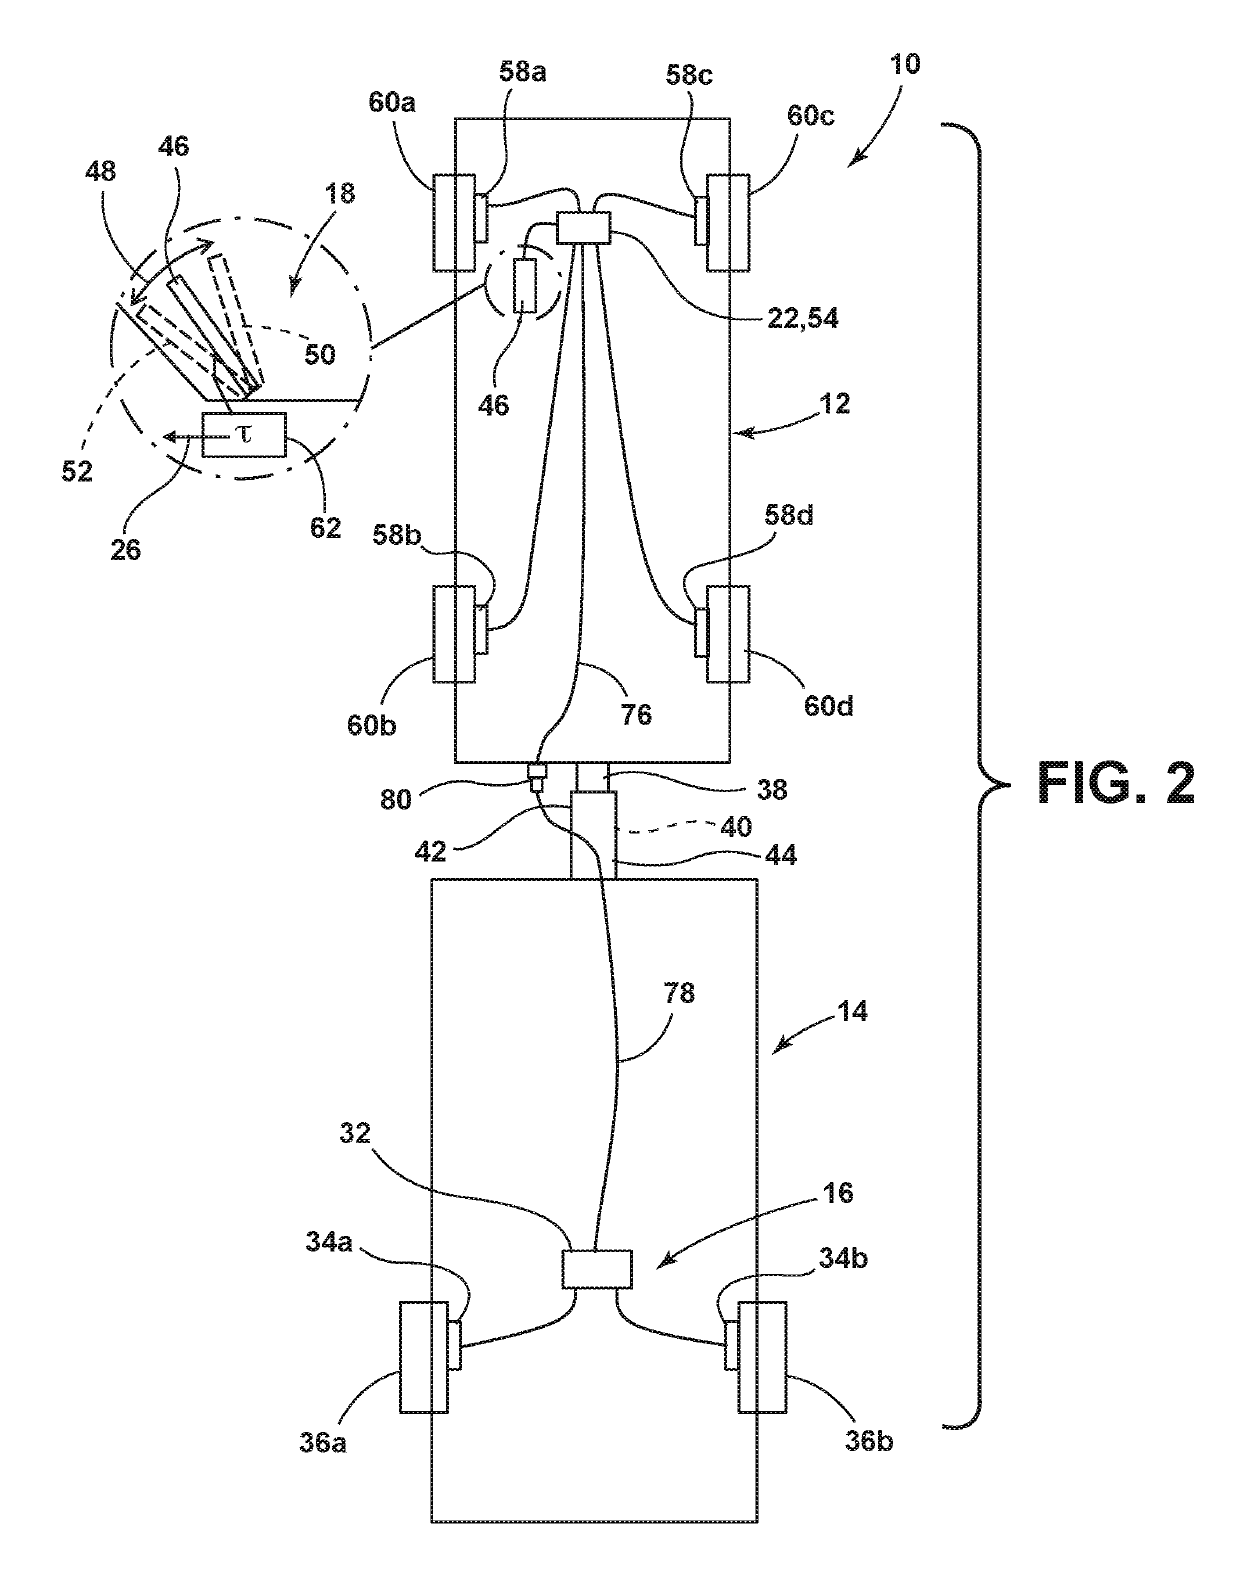 Method to automatically adjust a trailer brake controller